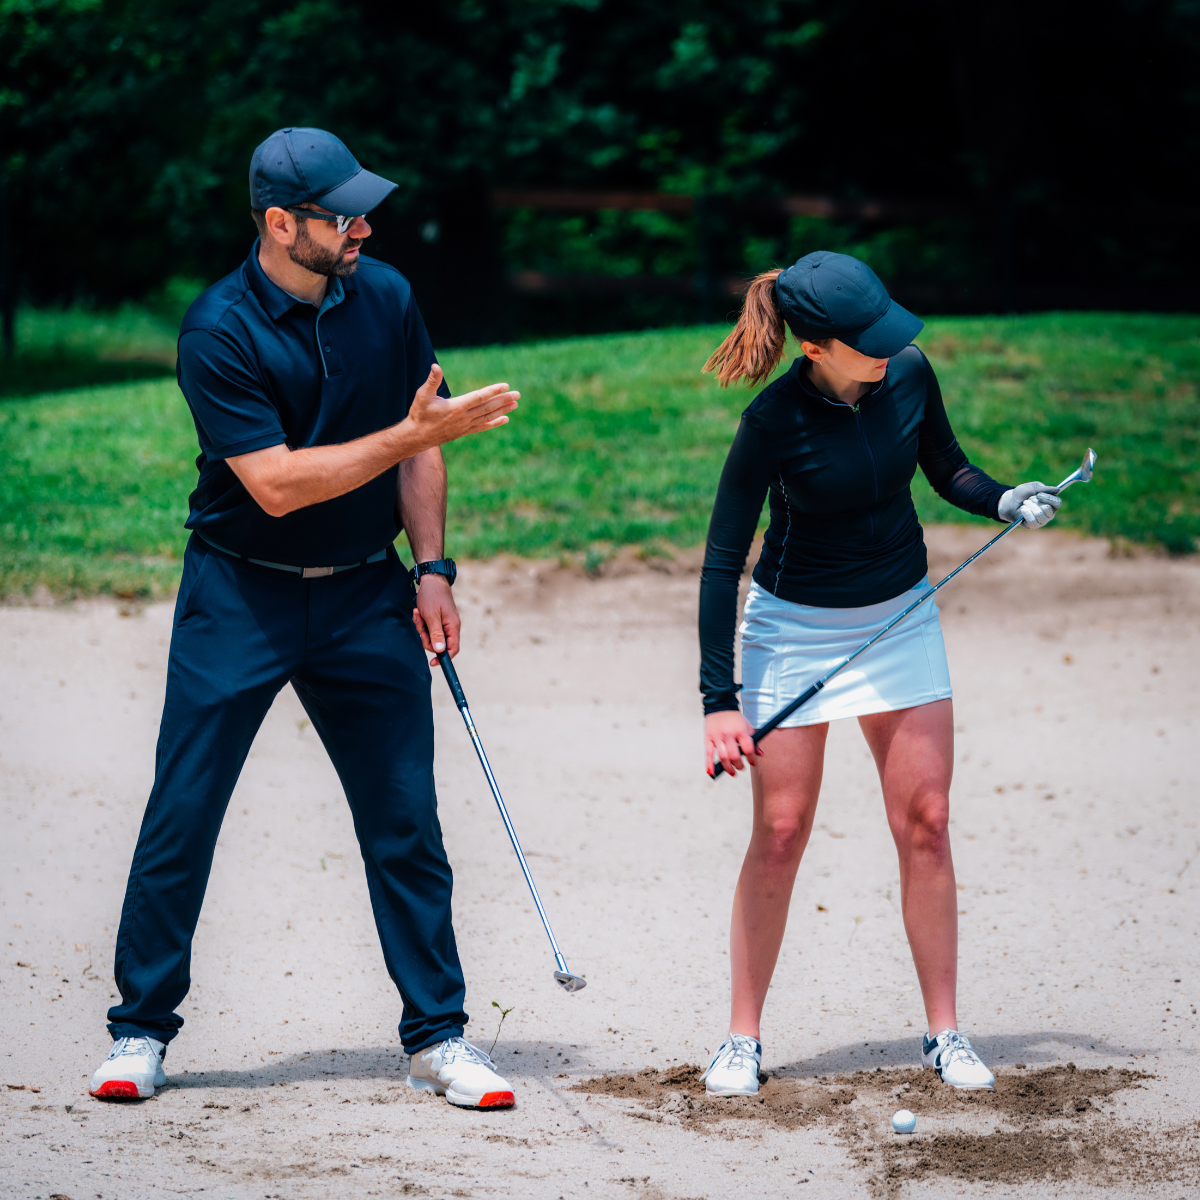 27. Score a Hole-in-One with Unique Golf Lessons